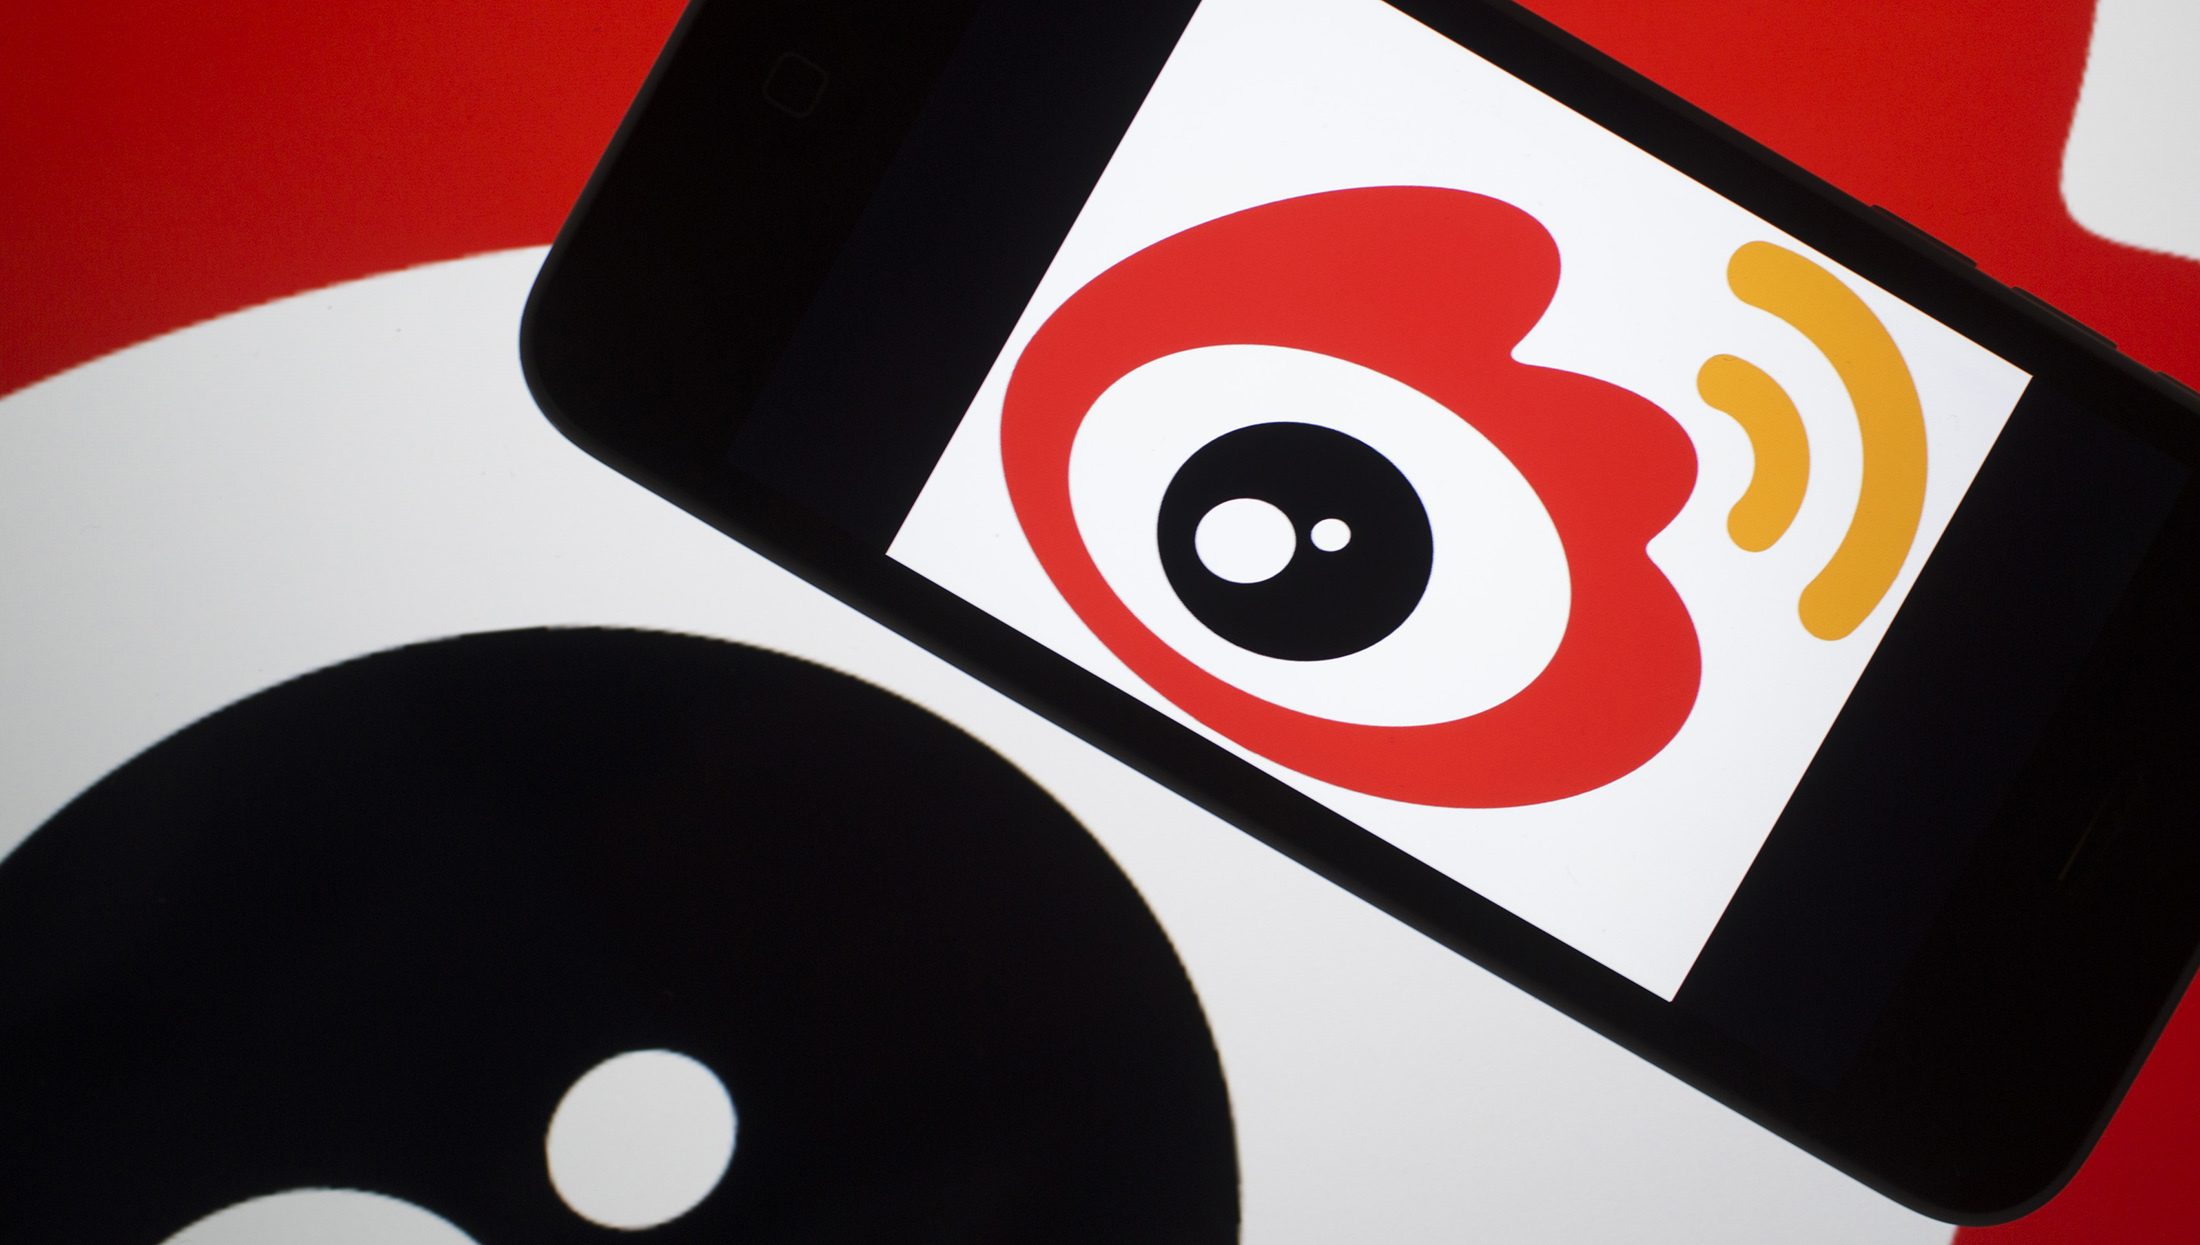 Aristeia Capital says Weibo backer Sina could fetch 67% premium in share sale